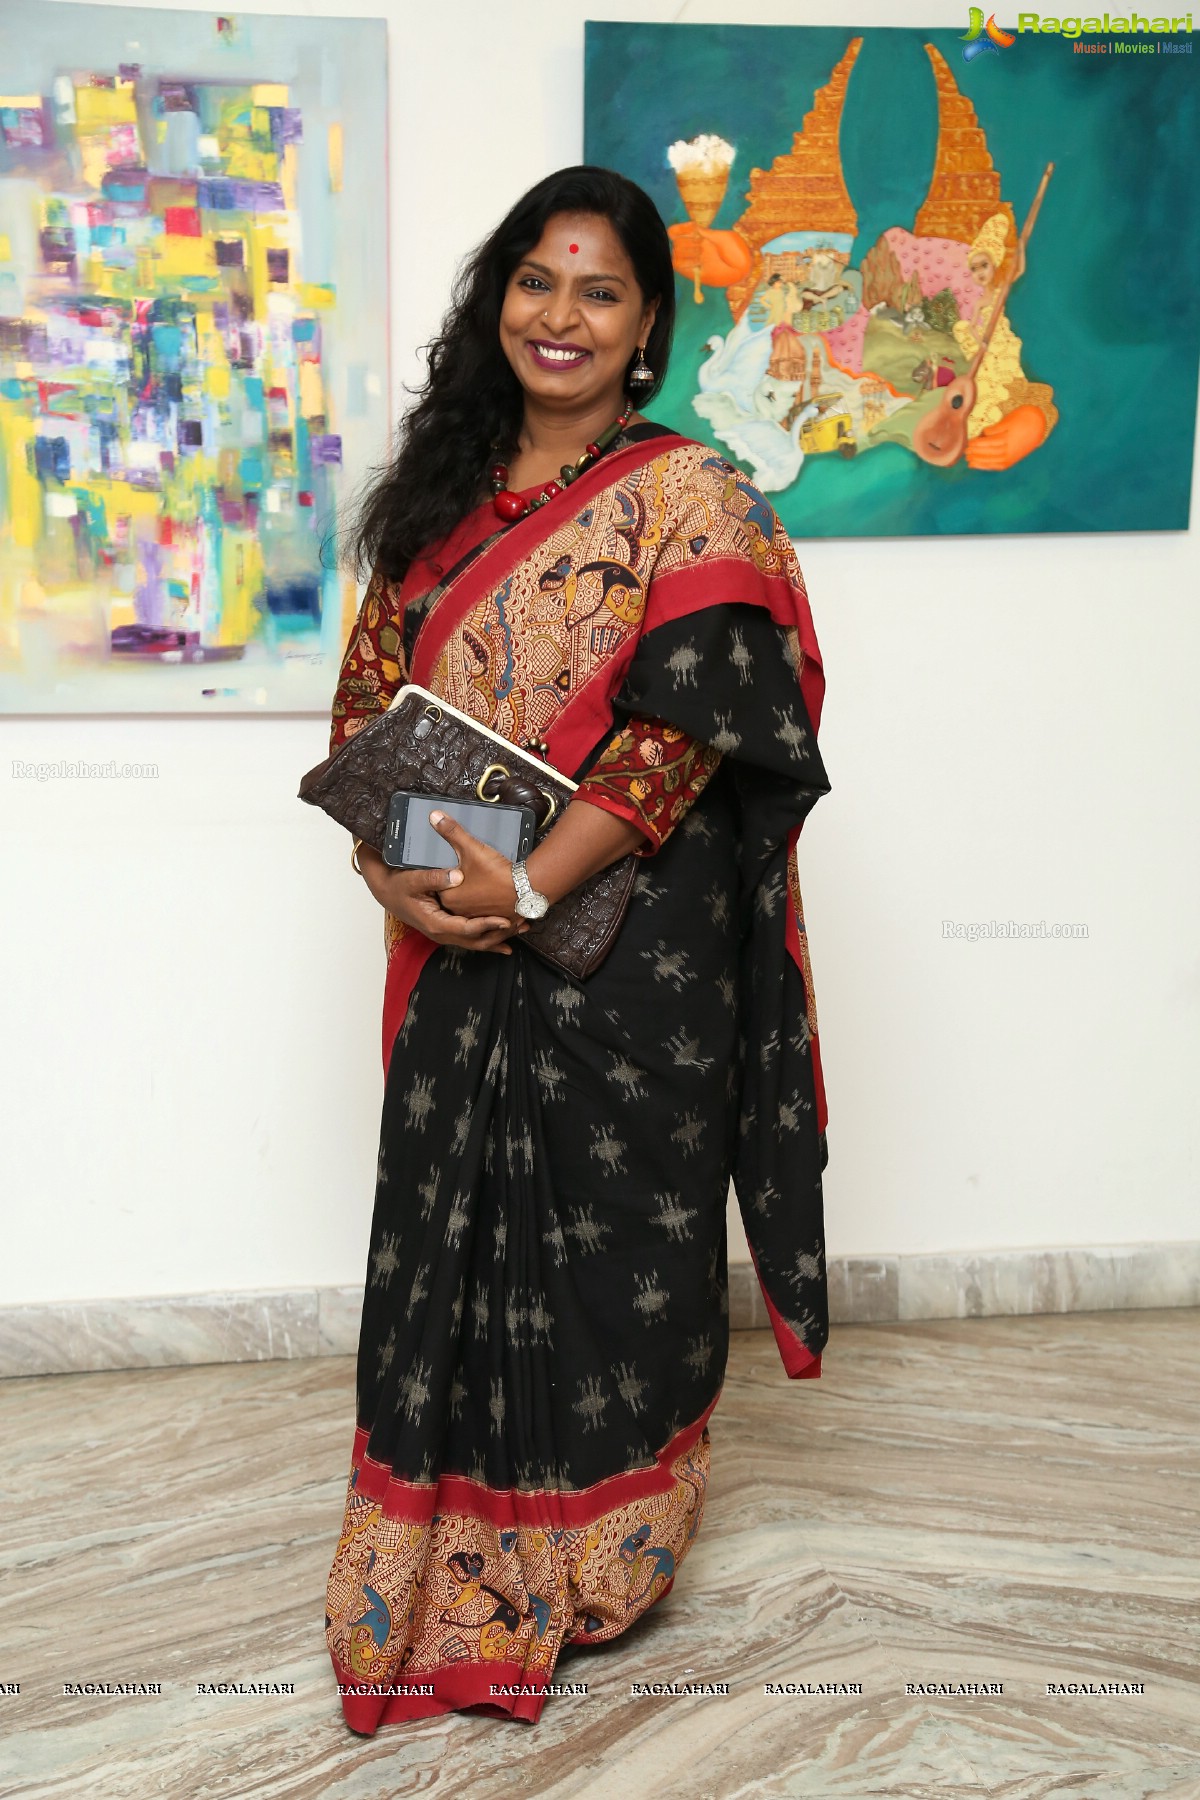 NavDevi - A Group Exhibition and Creative Interaction of 9 Women at Alliance Francaise of Hyderabad